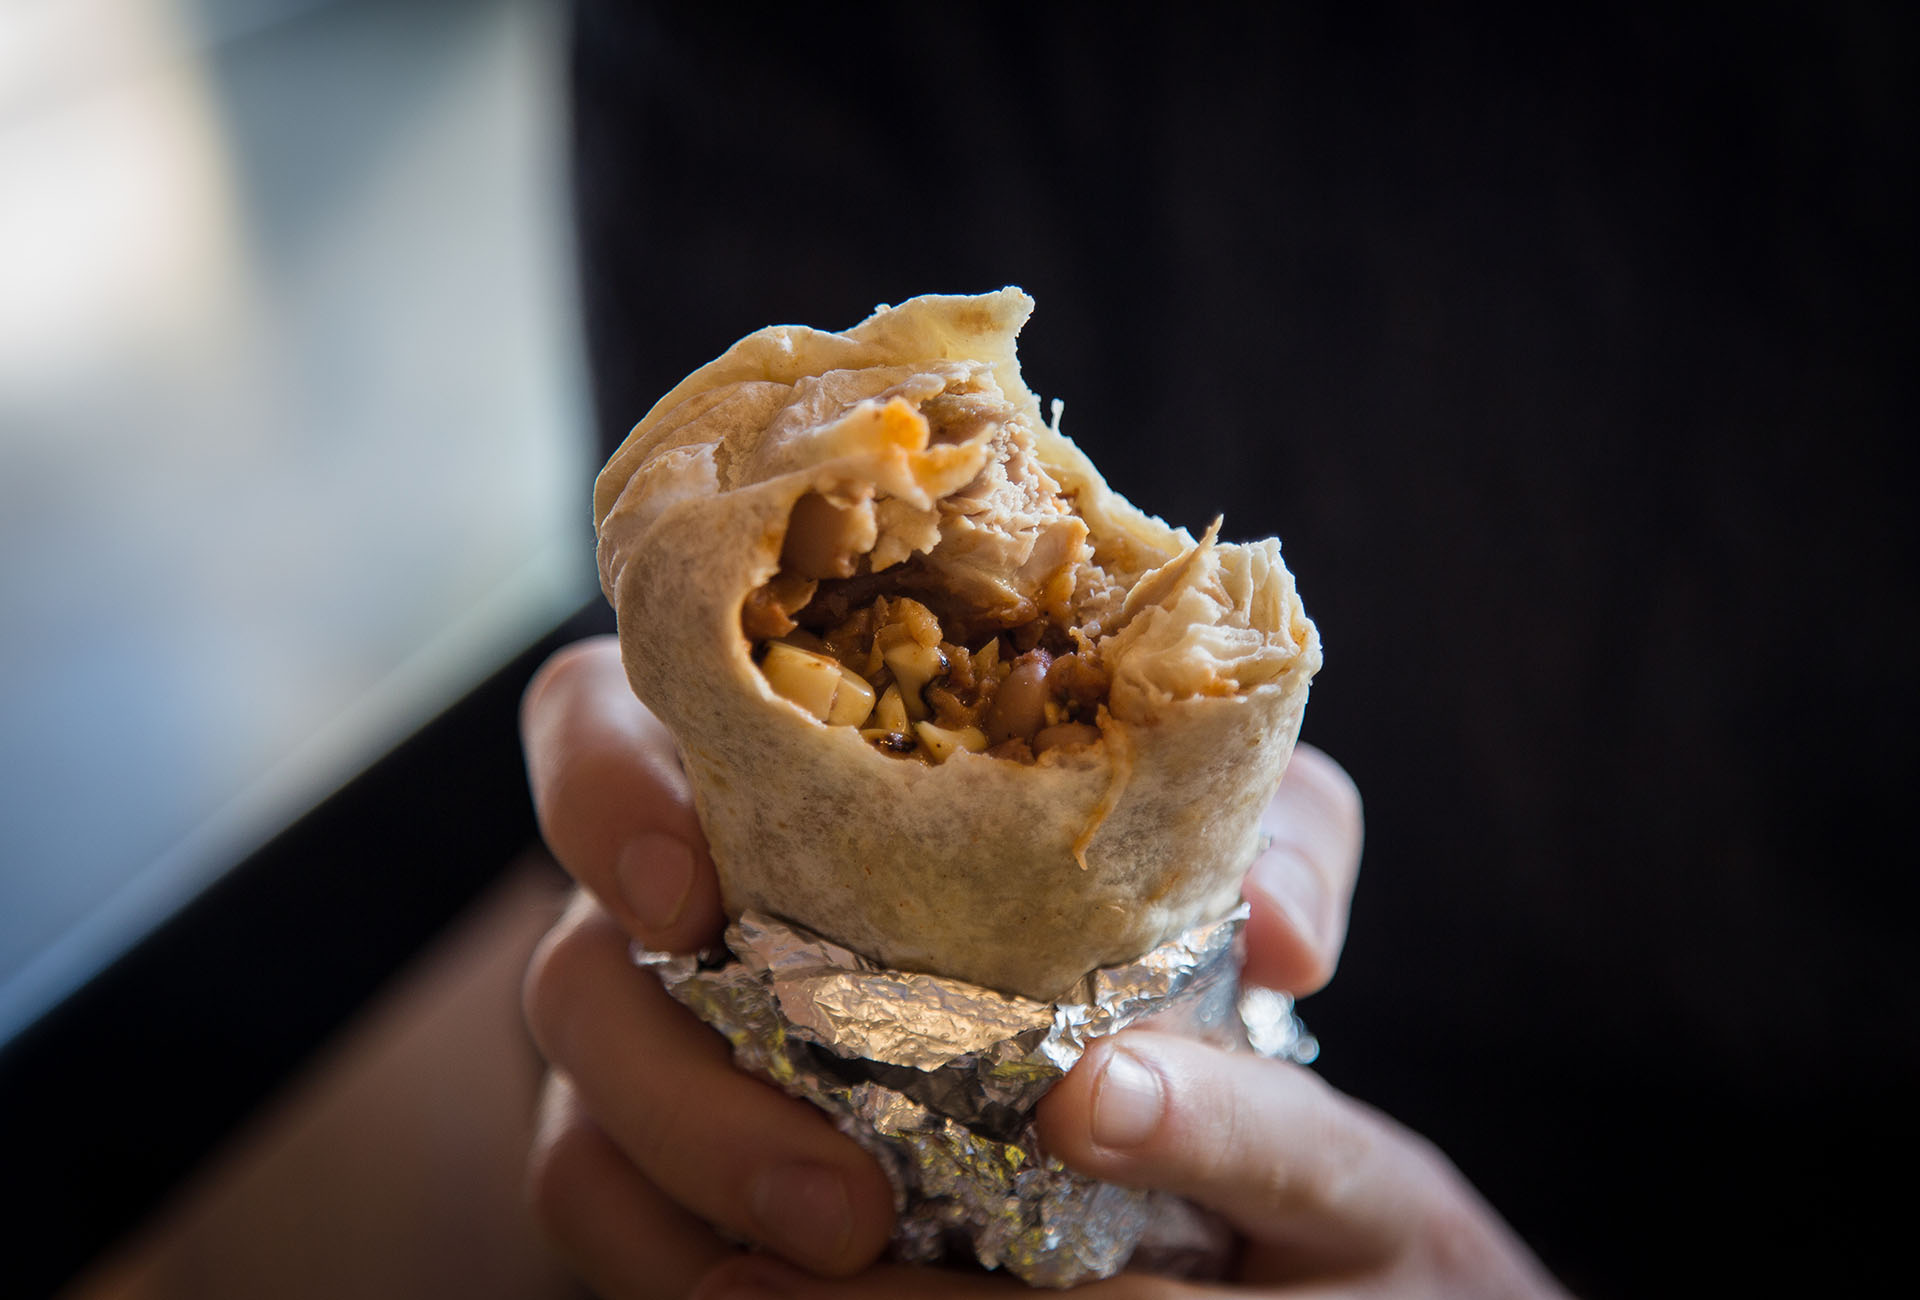 The inside of the Fried Chicken Burrito, and a glimpse of a crispy piece of Fried Chicken inside.